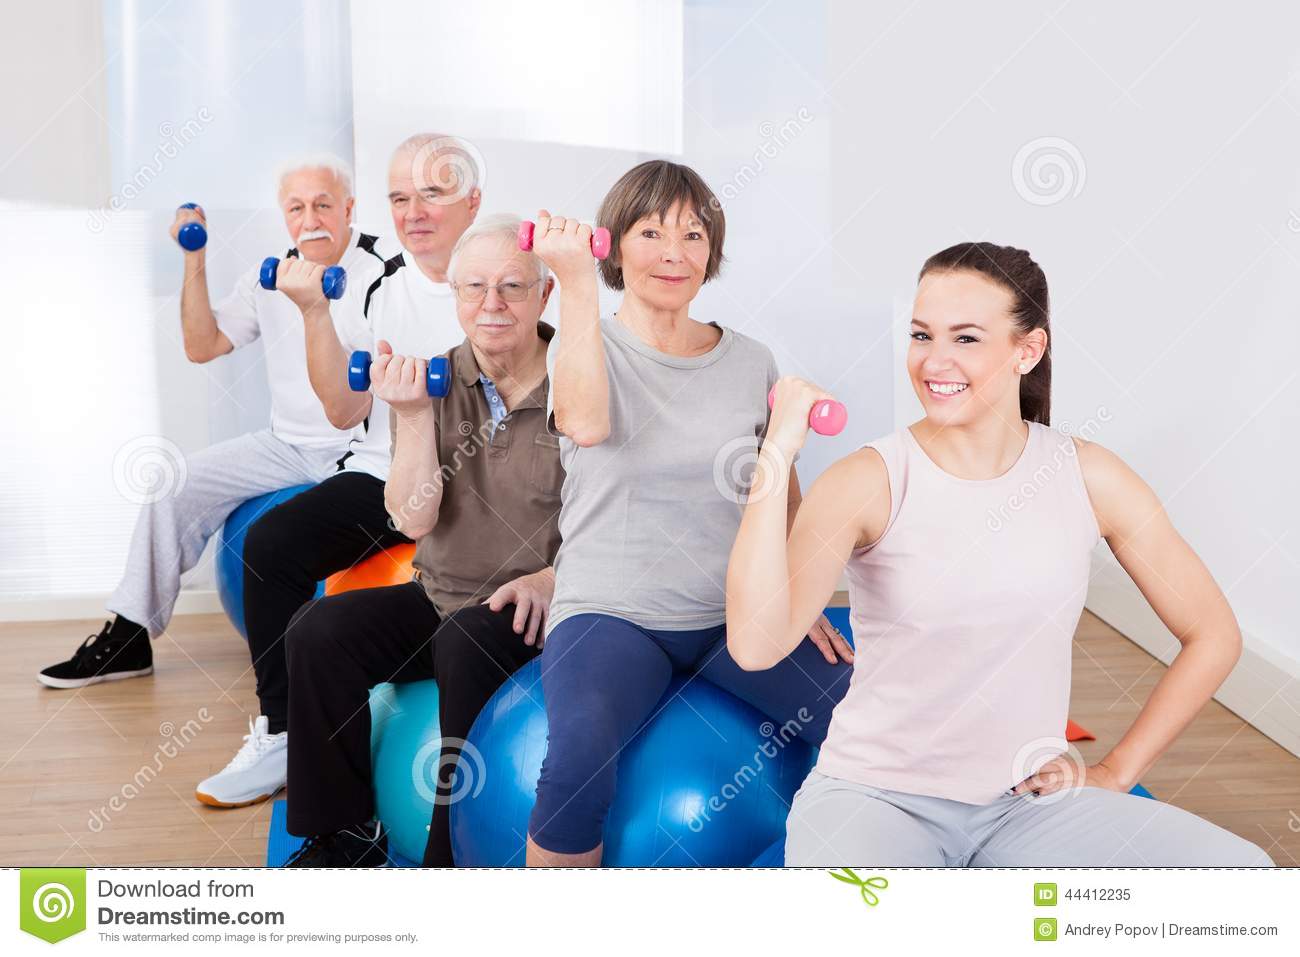 Customers Using Hand Weights While Sitting On Fitness Balls At Gym